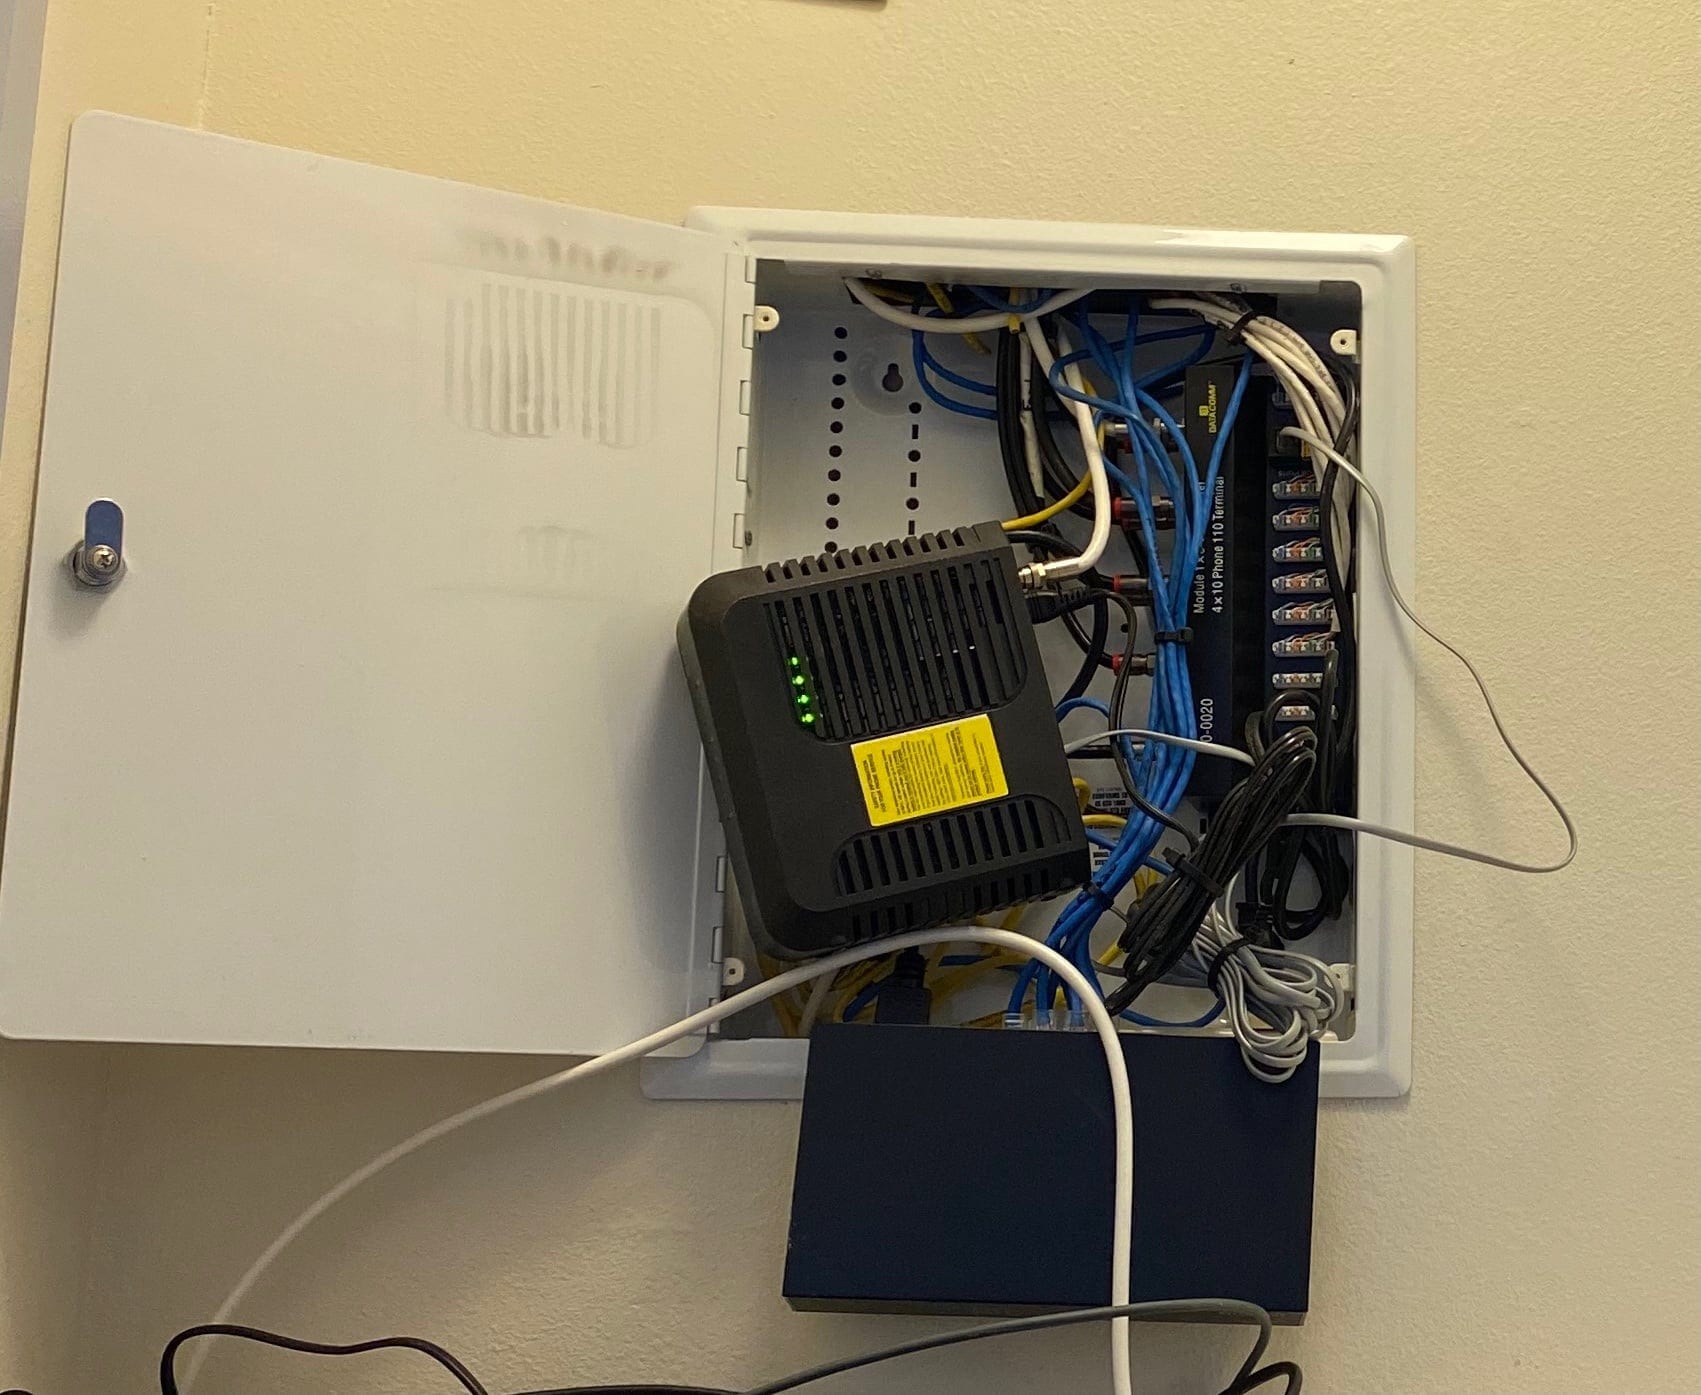 Cleanup and Home Network installation